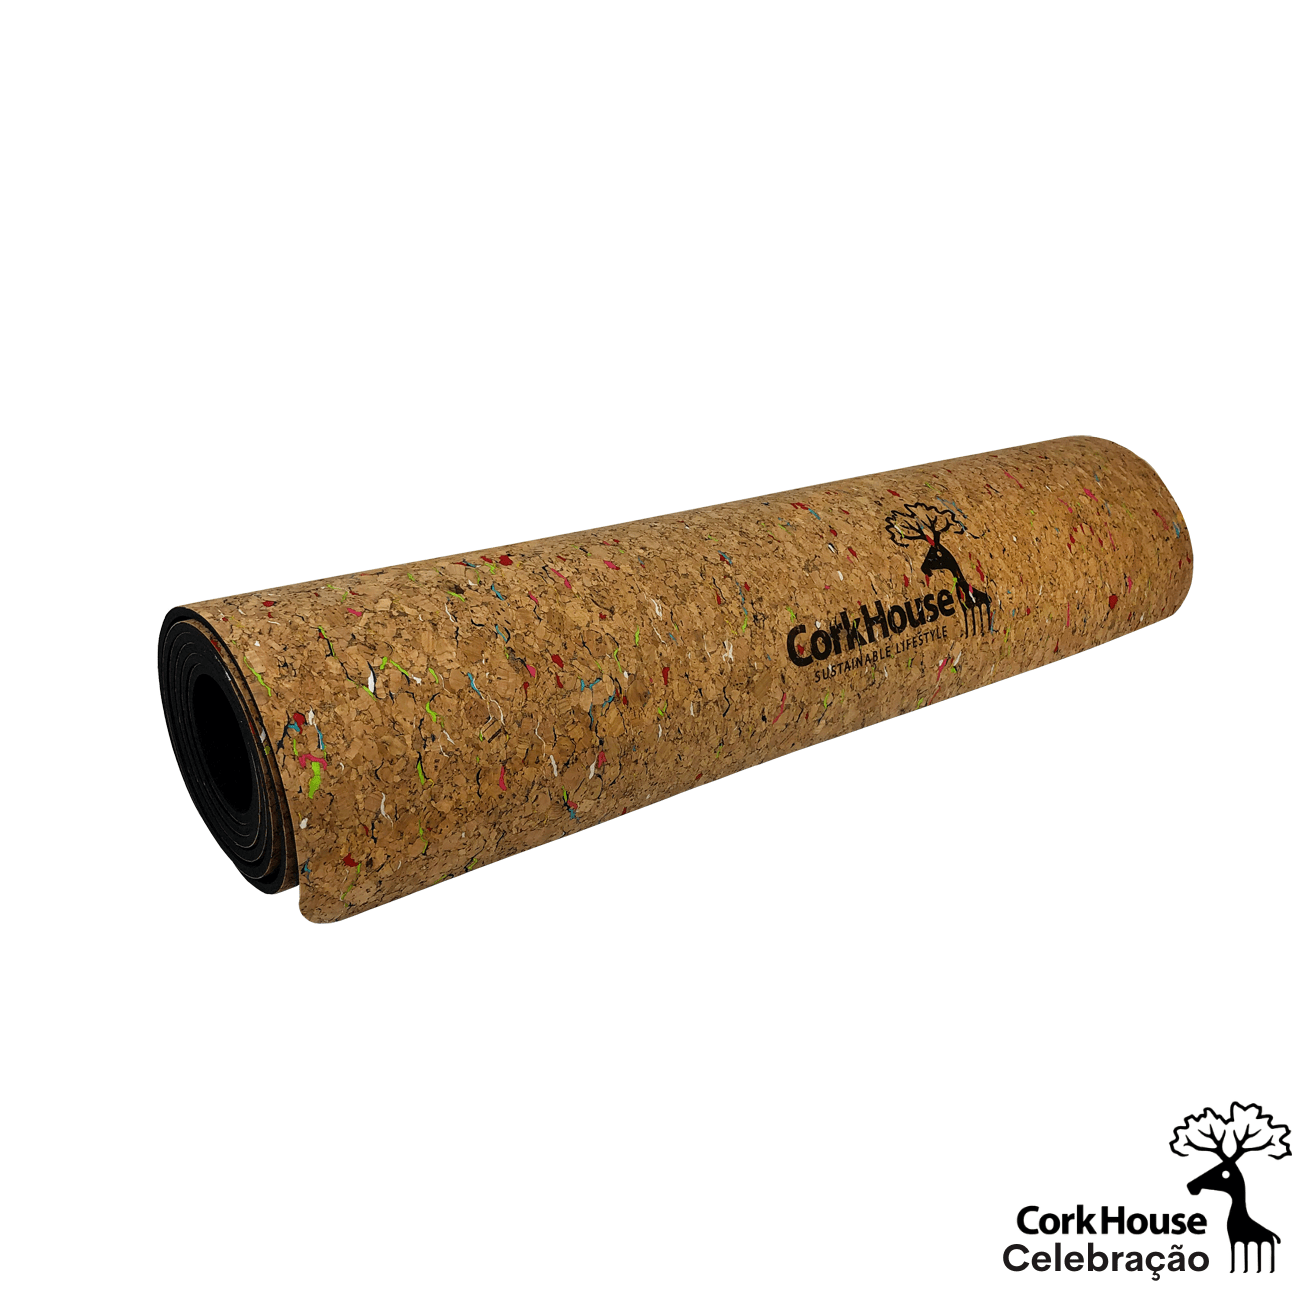 A rolled cork and natural rubber yoga mat featuring the corkhouse logo and confetti pattern on the cork top.